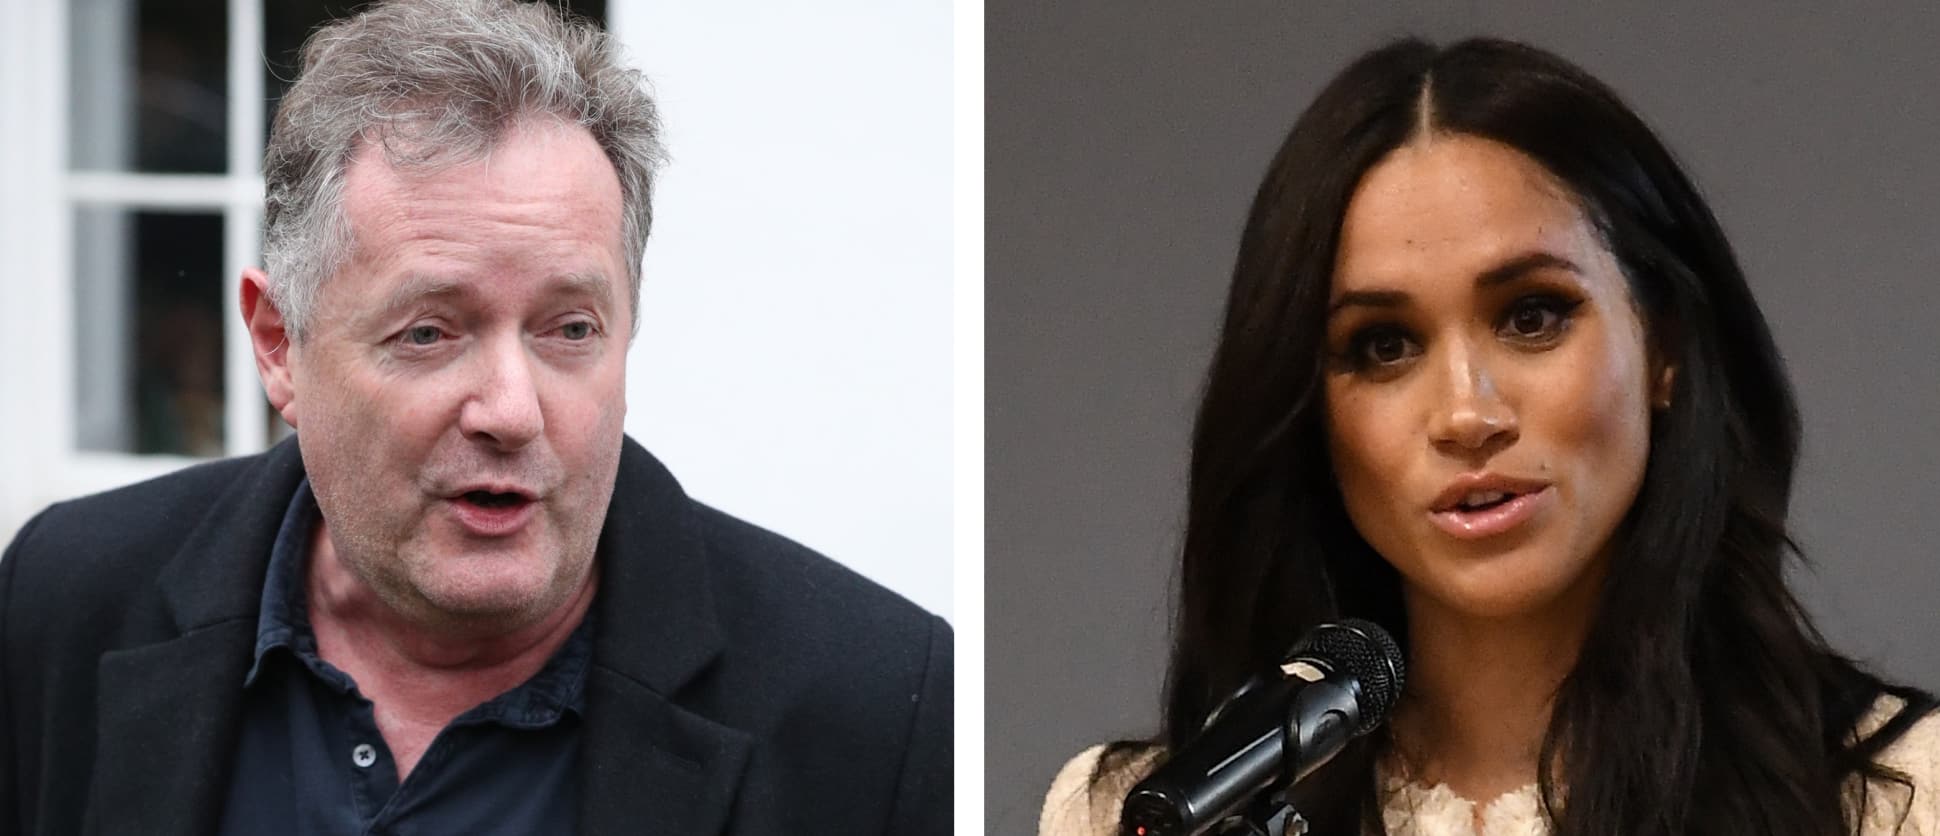 Piers Morgan quit Good Morning Britain after Meghan complaint